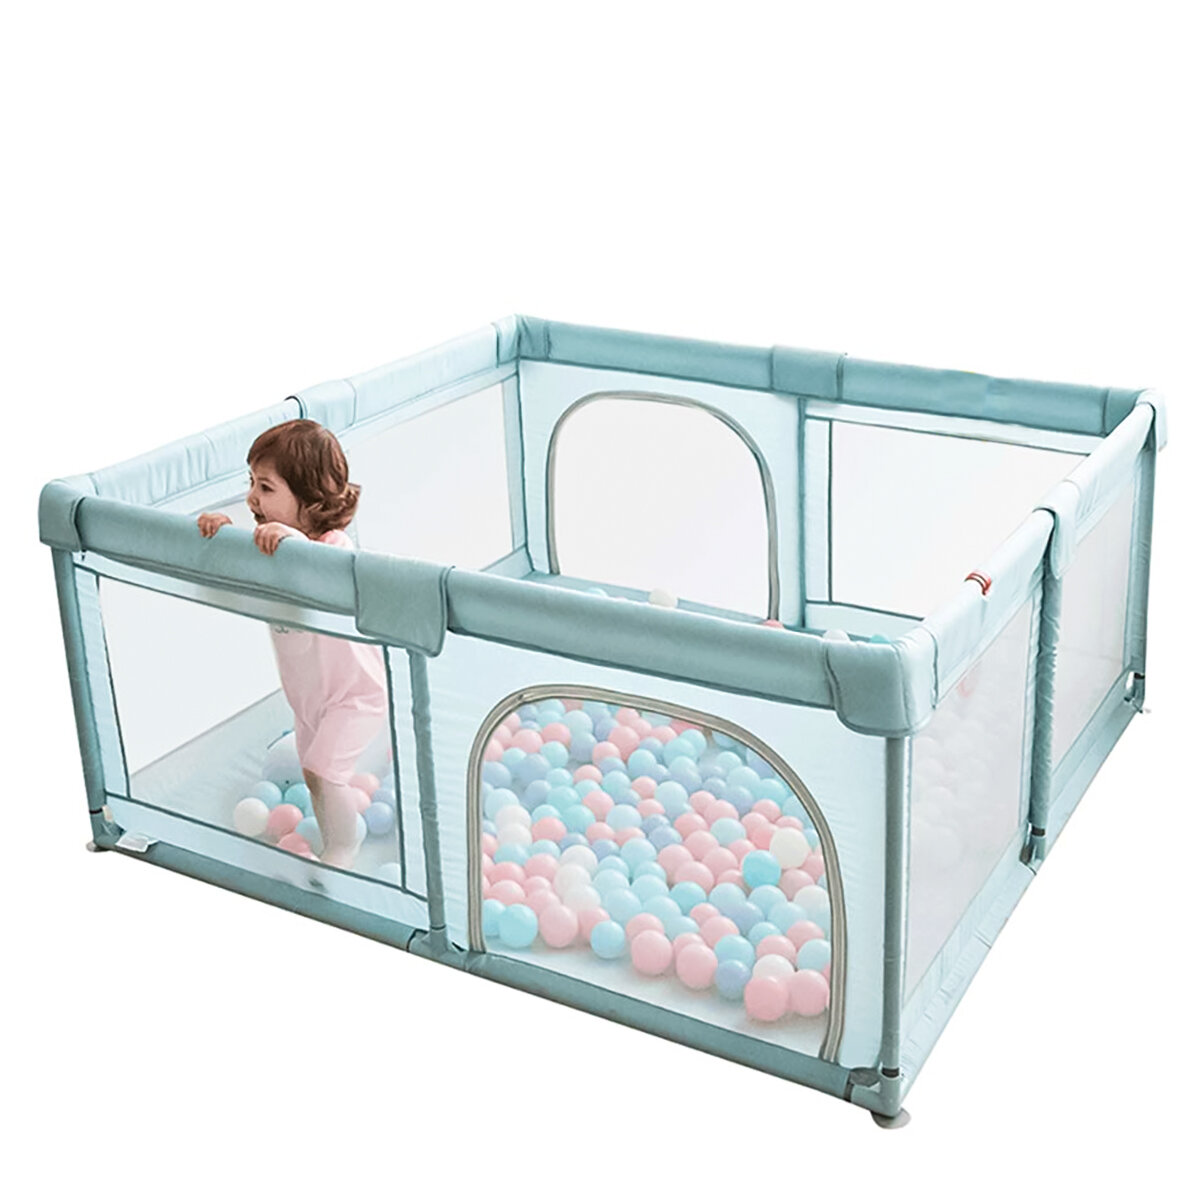 Image of Baby Playpen Interactive Safety Indoor Gate Play Yards Tent Court Foldable Portable Kids Furniture for Children Large Dr